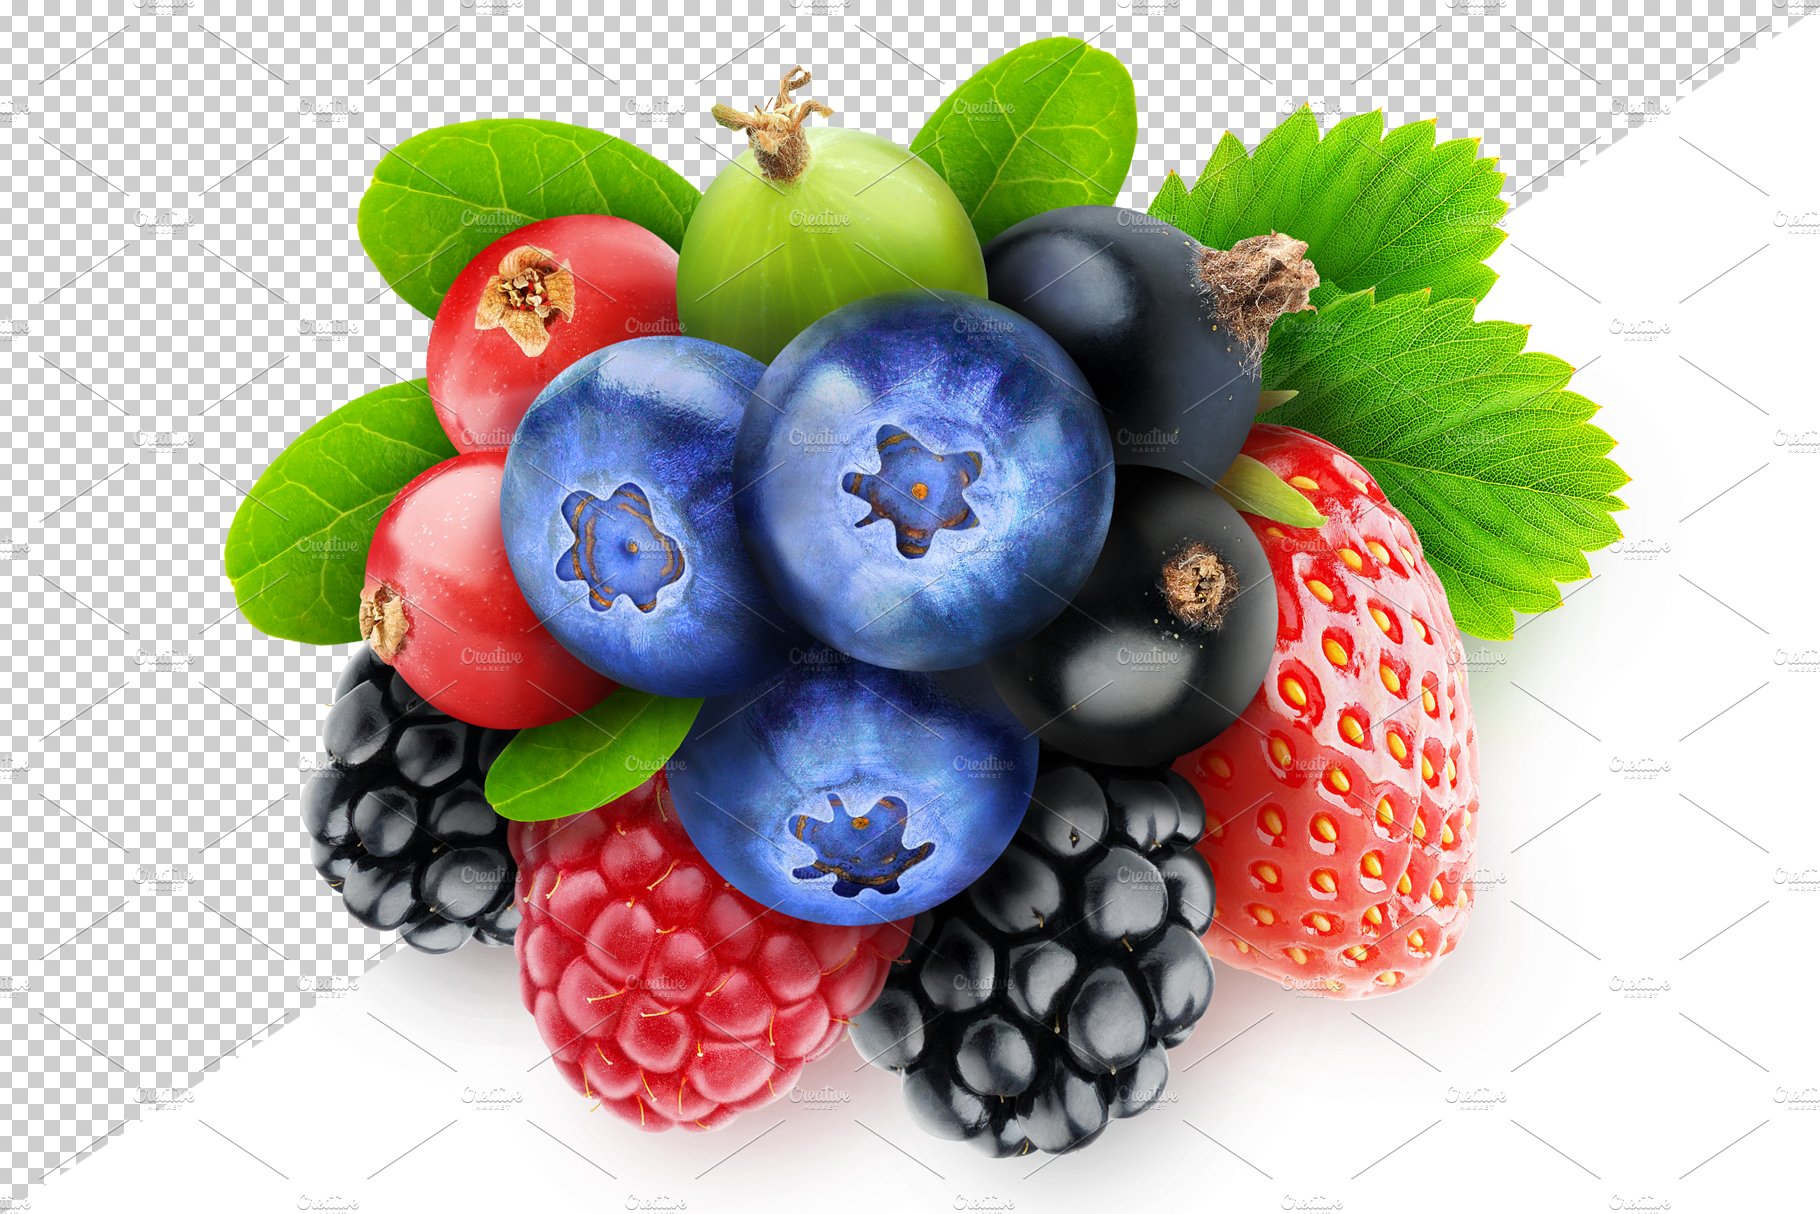 Mixed berries preview image.